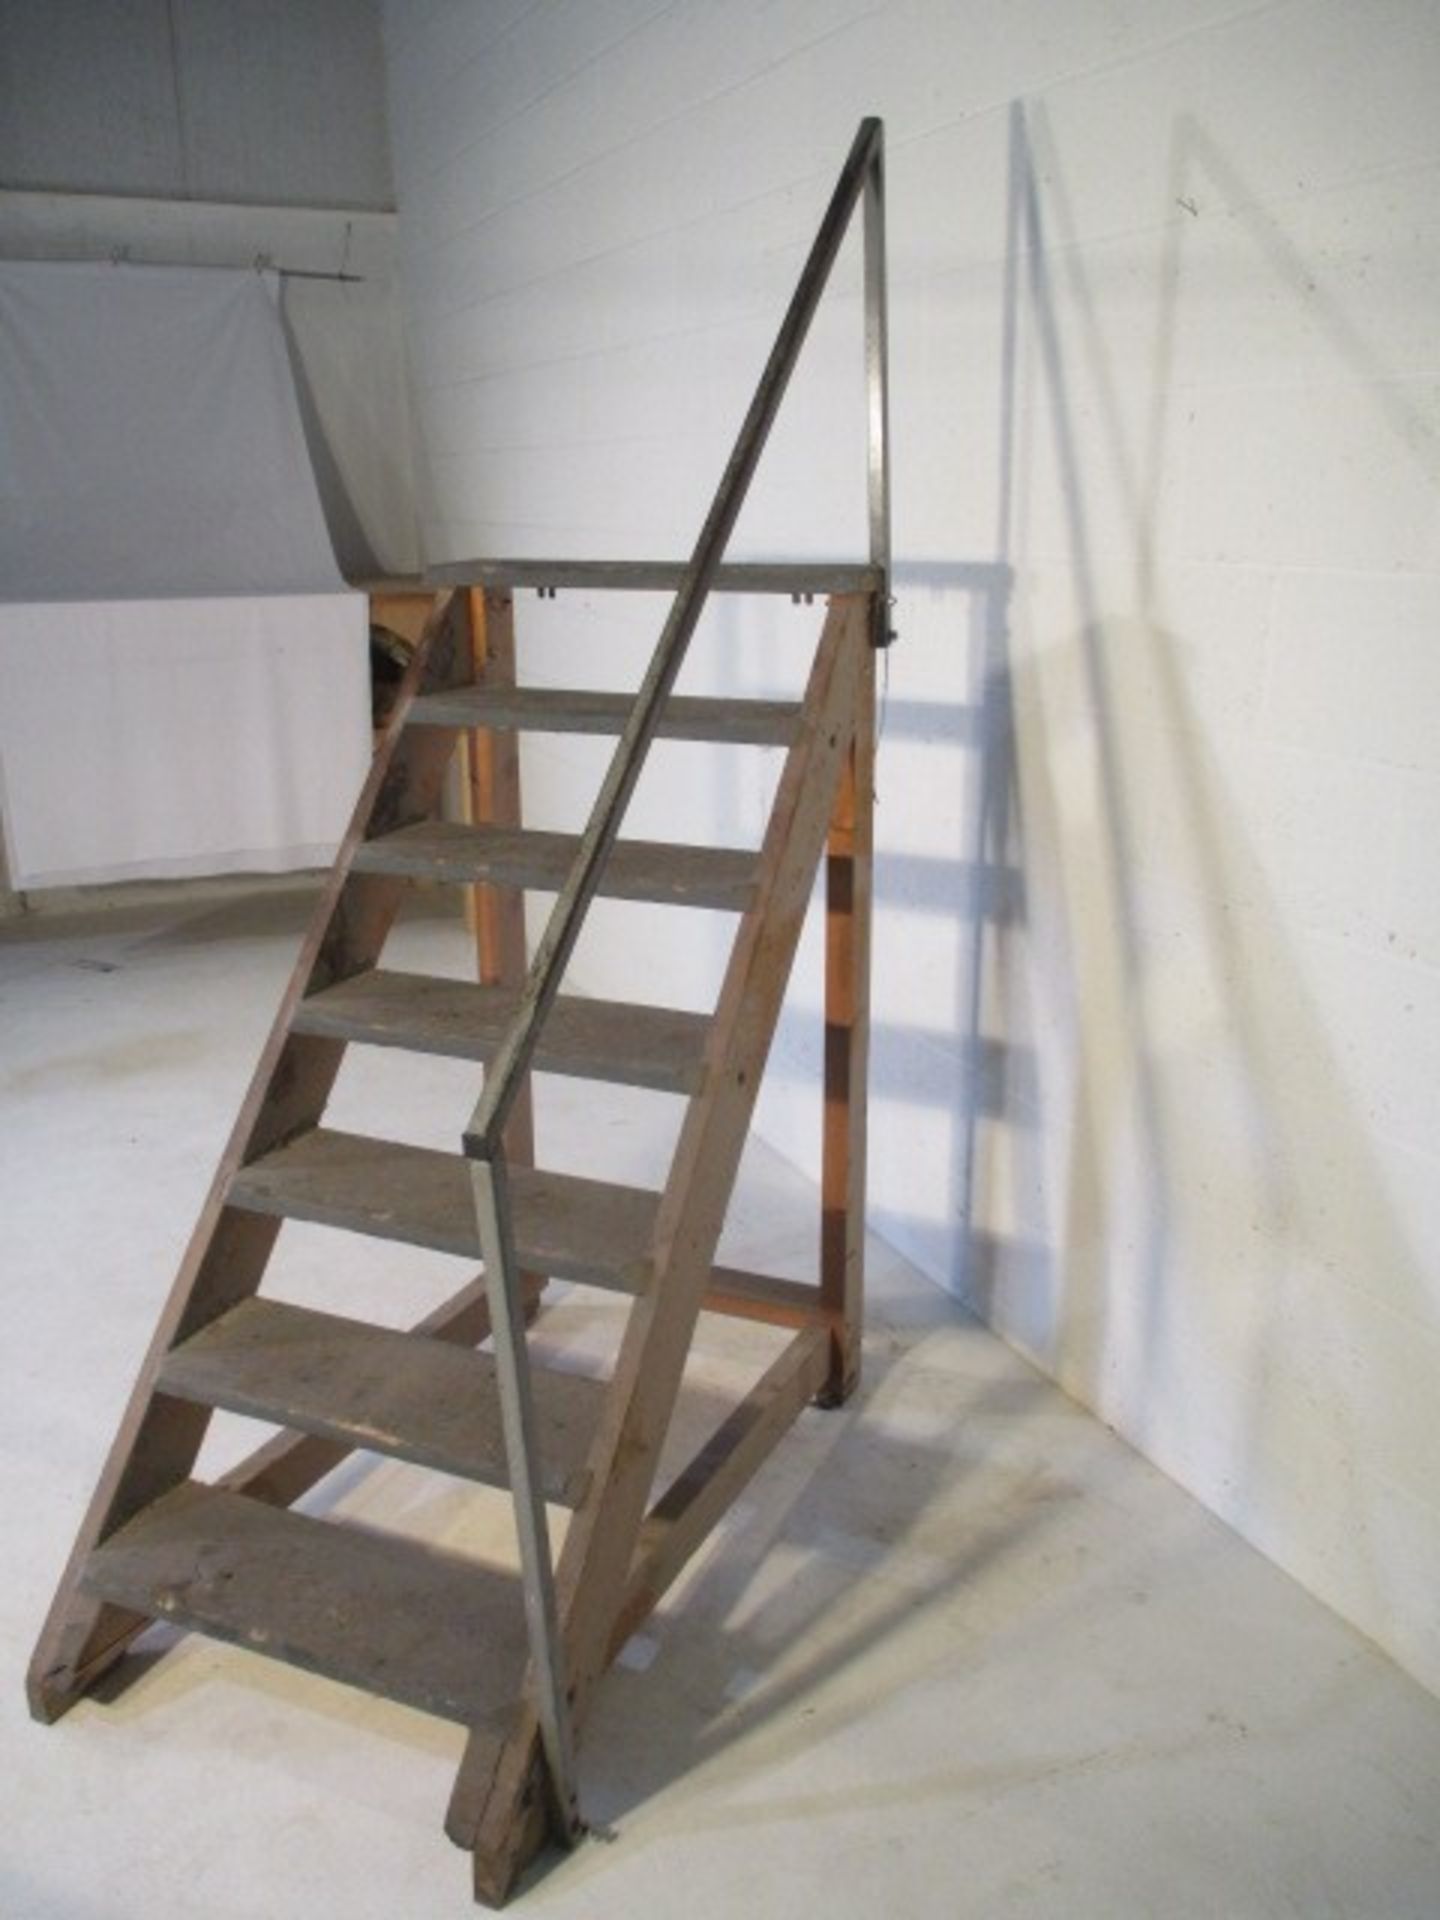 A set of industrial steps, rail loose, overall height 196 cm - Image 2 of 4